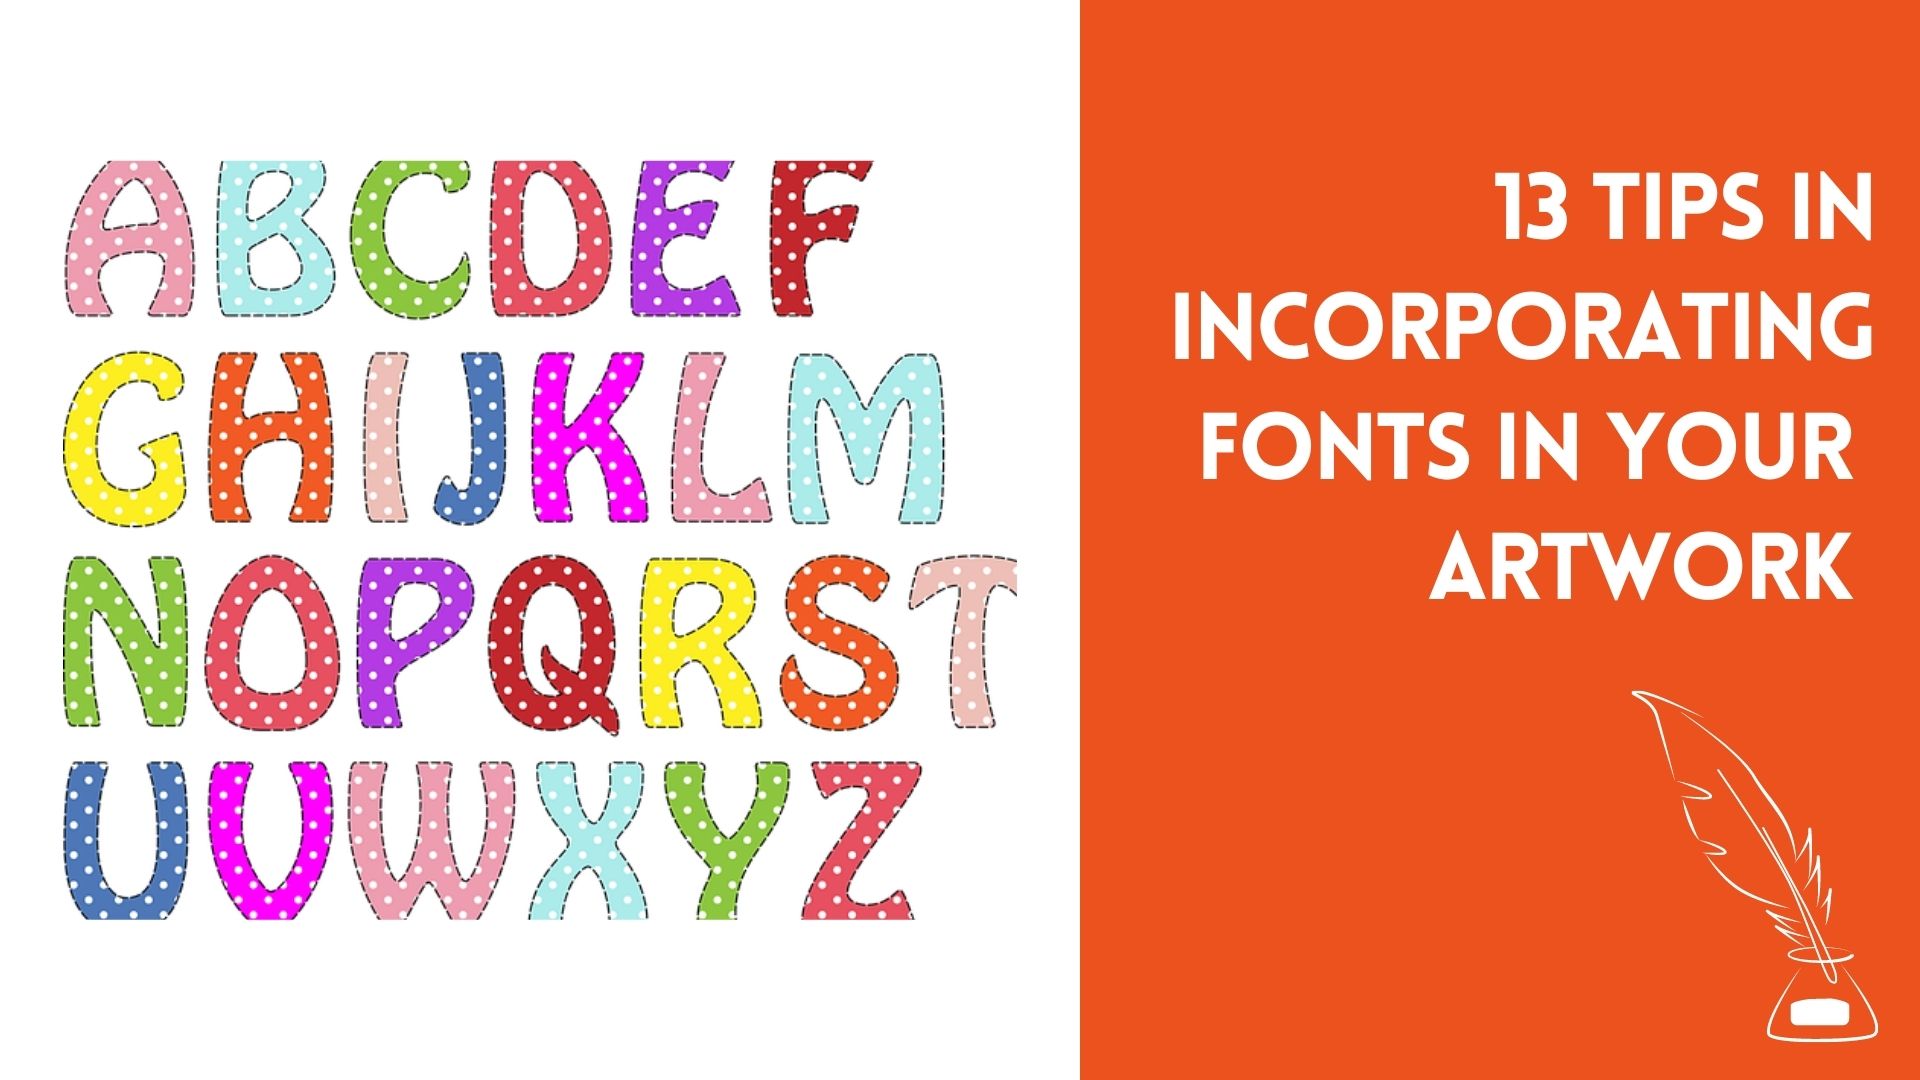 13‌ ‌Tips‌ ‌In‌ ‌Incorporating‌ ‌Fonts‌ ‌In‌ ‌Your‌ ‌Artwork‌